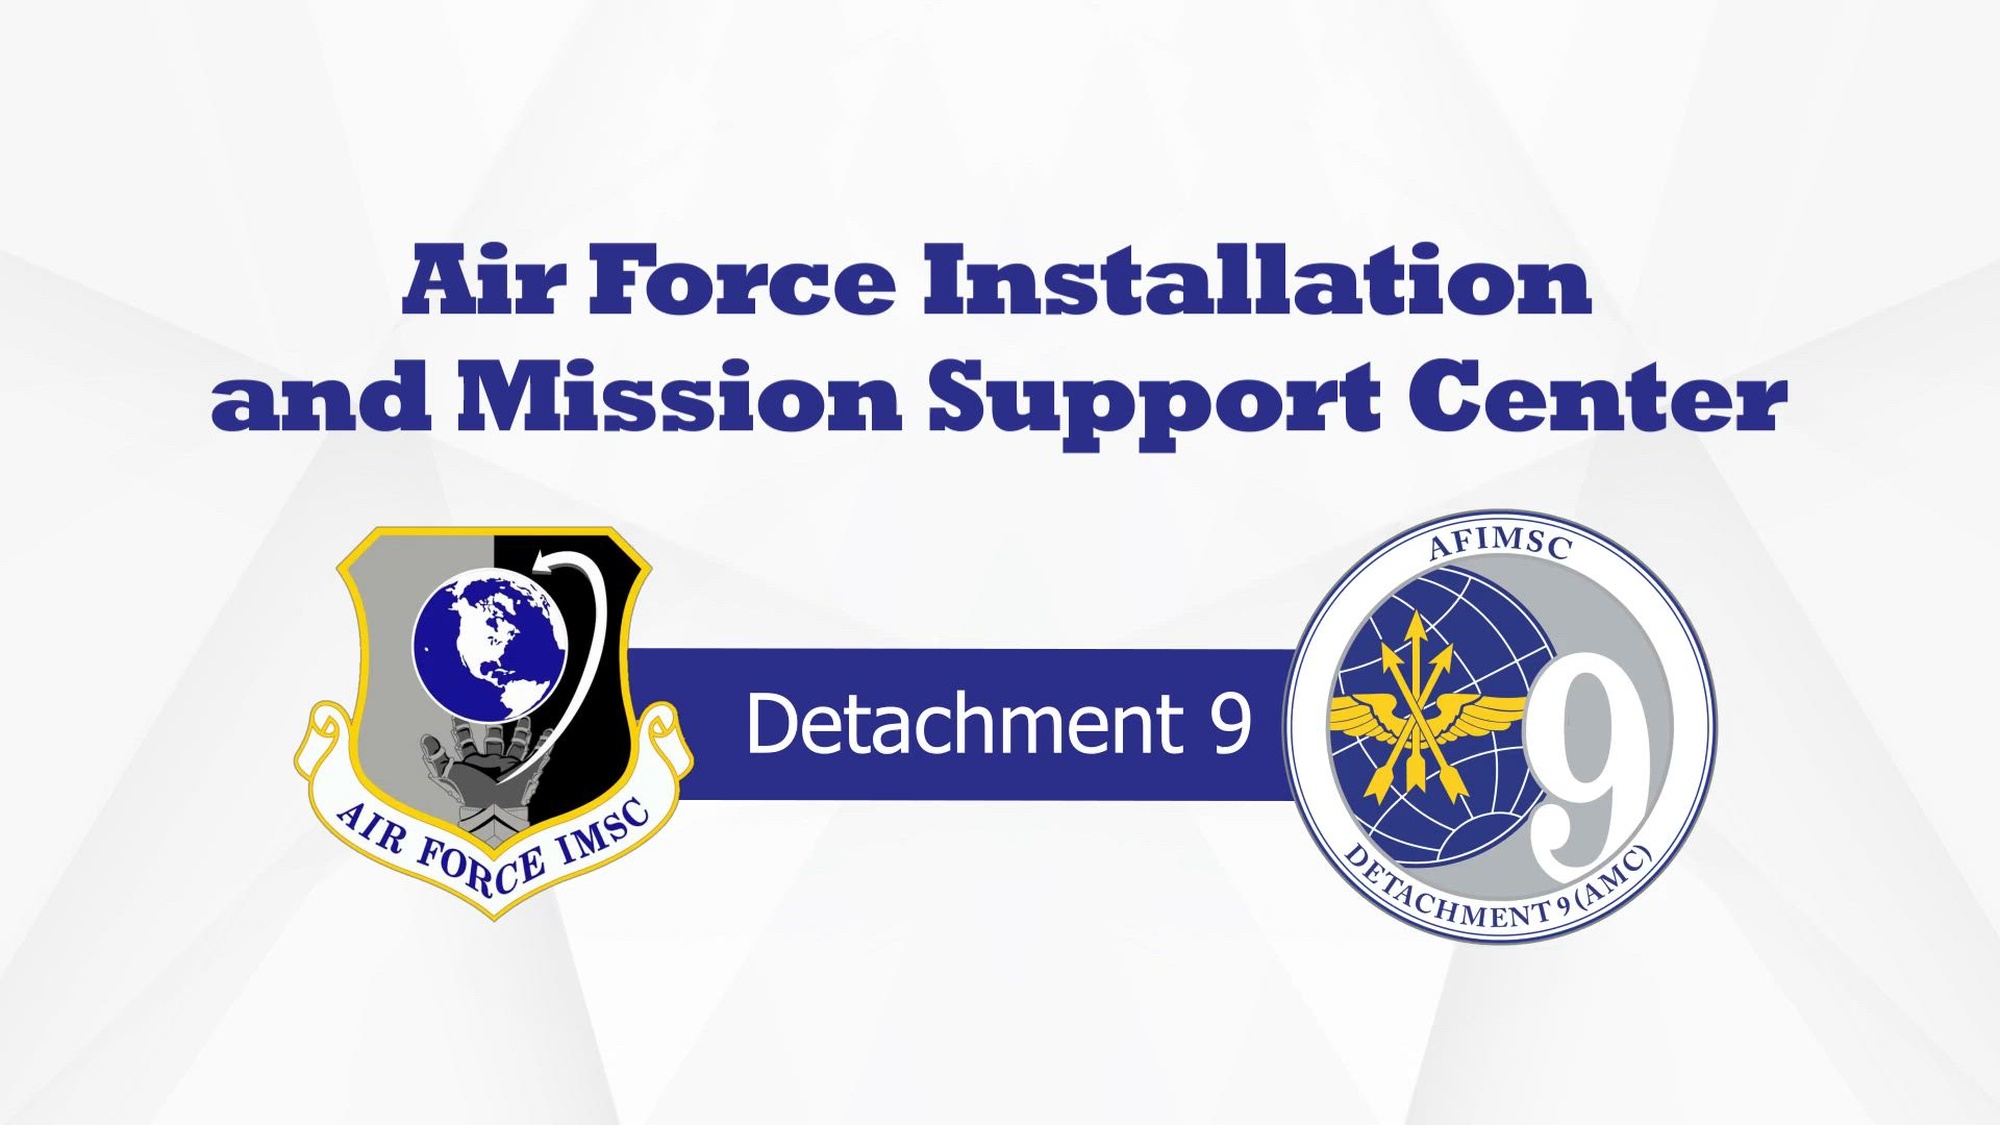 Air Force Installation and Mission Support Center Detachment 9 is responsible for synchronizing Air Mobility Command’s installation and mission support to ensure they are mission ready and capable of enabling airlift and refueling operations anywhere in the world at a moment's notice.